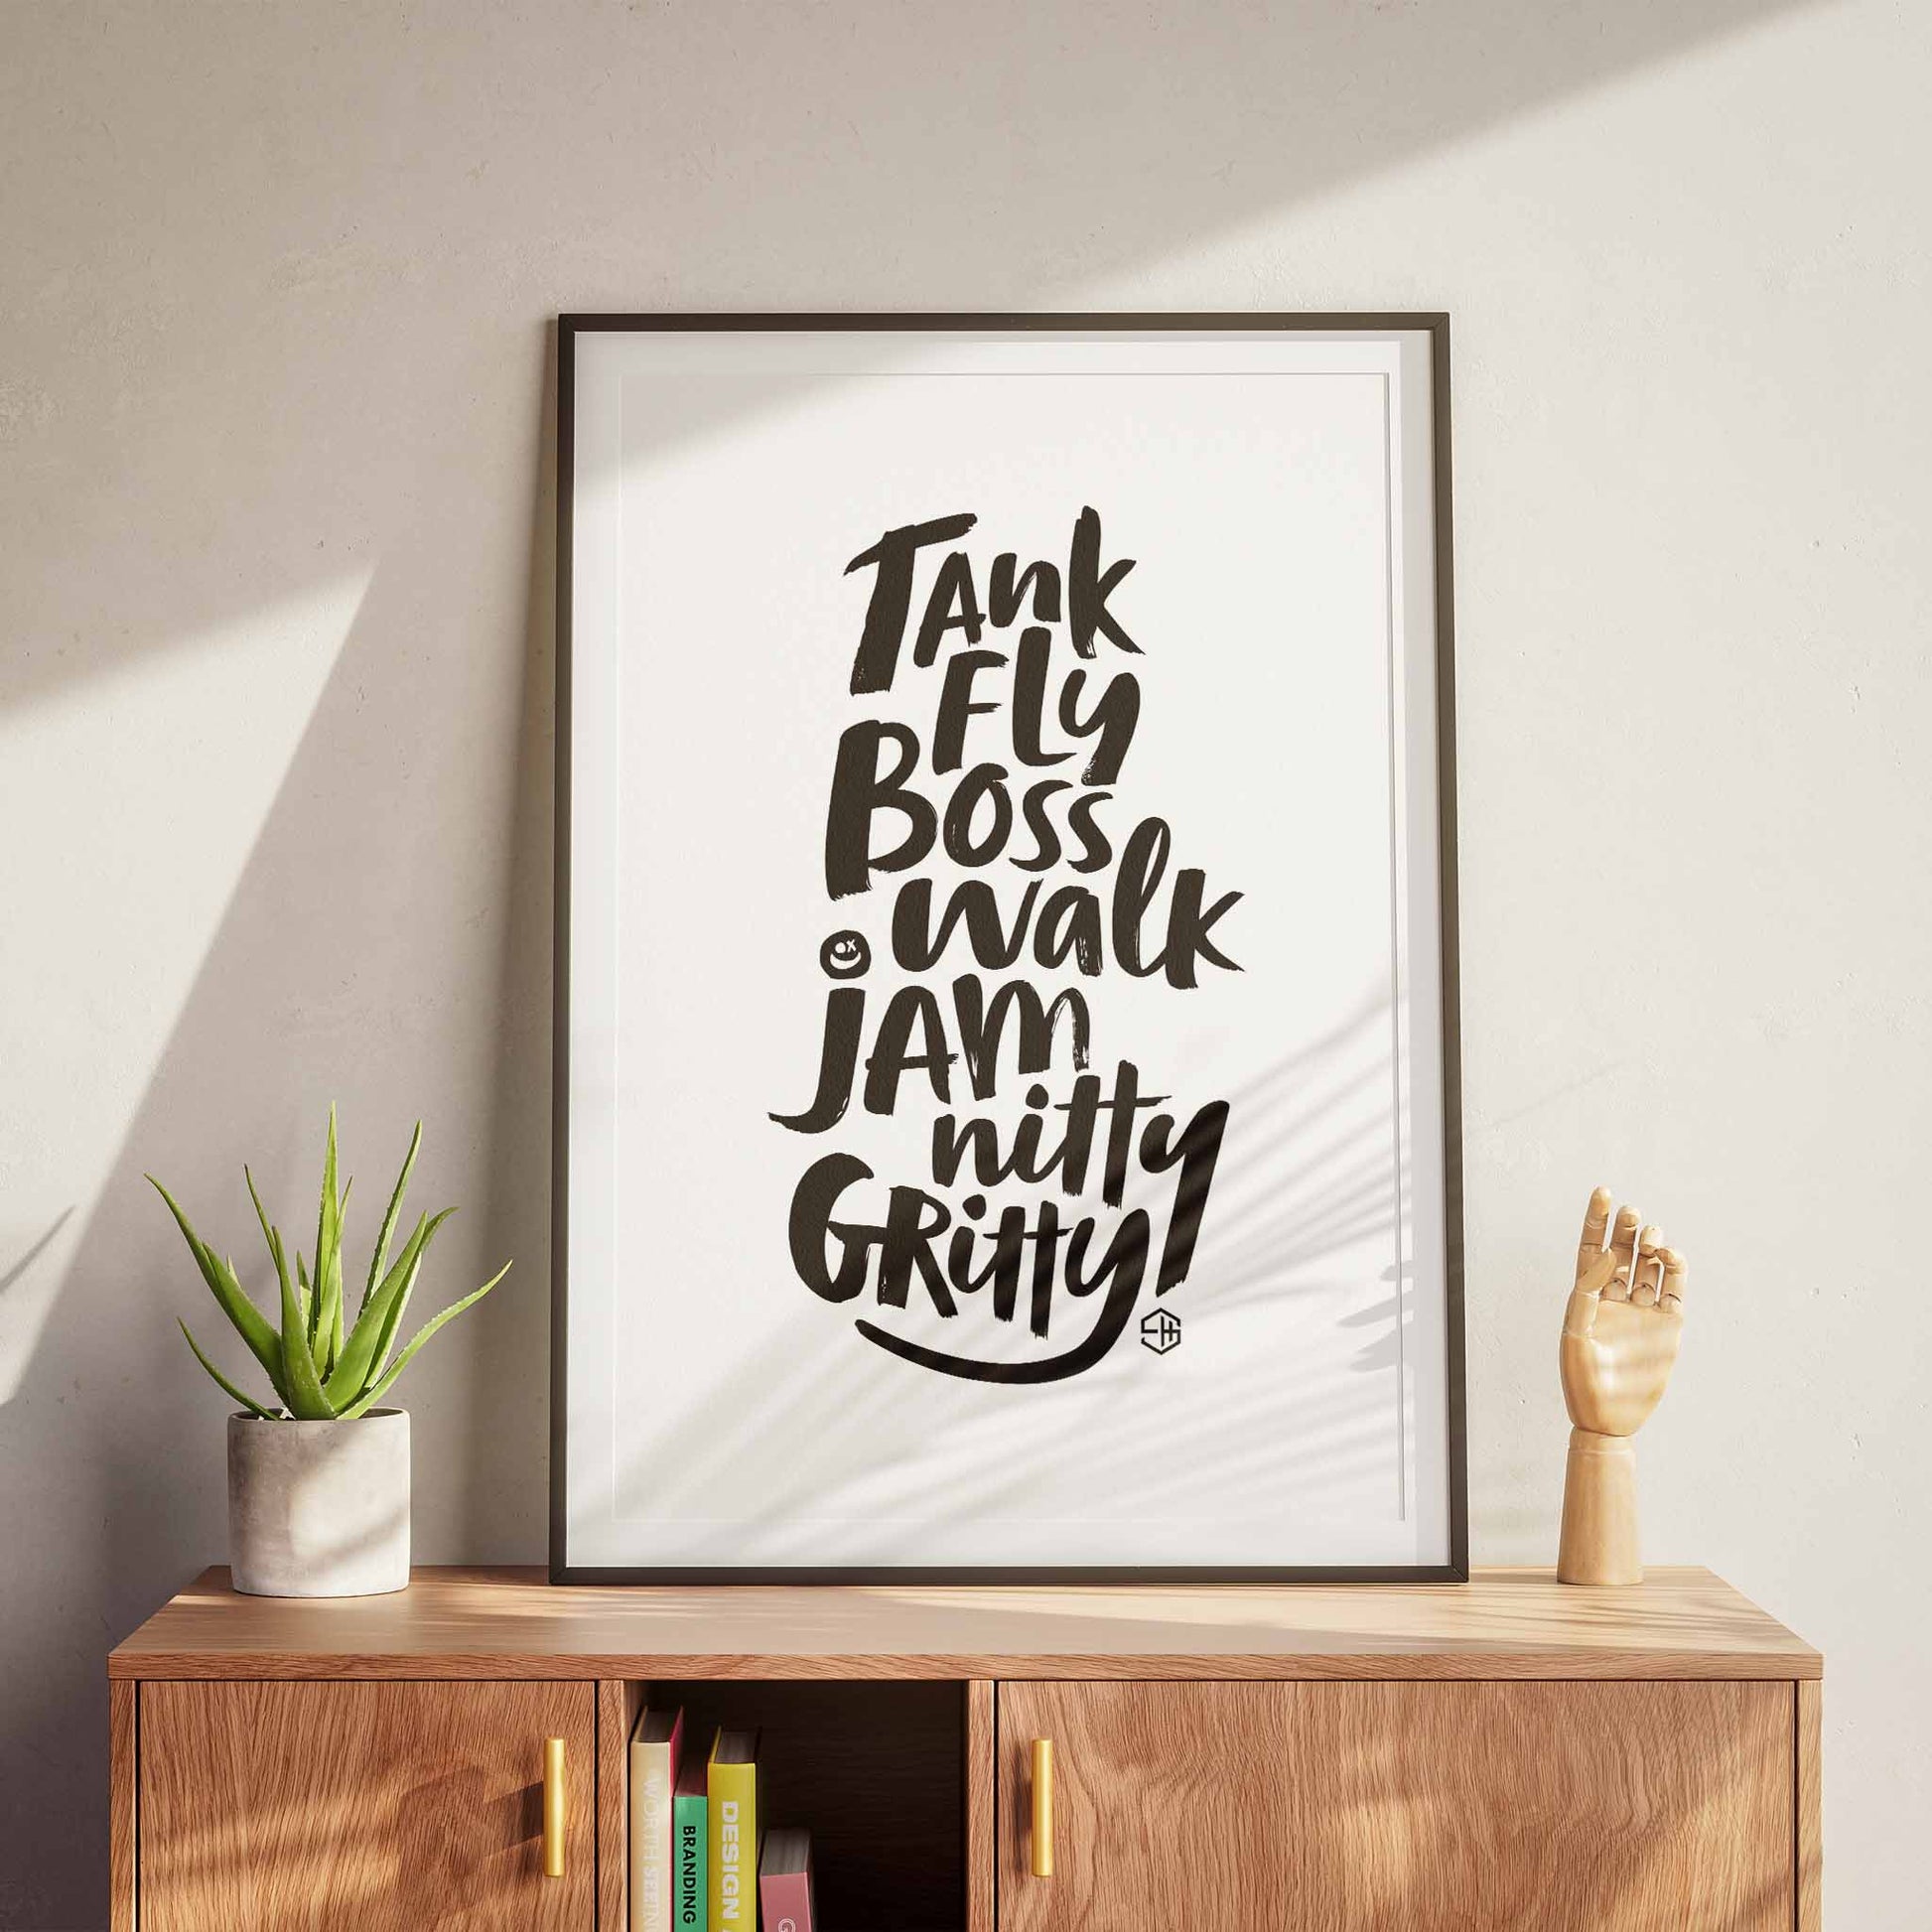 Tank Fly Boss Walk Jam Nitty Gritty Typographic Poster